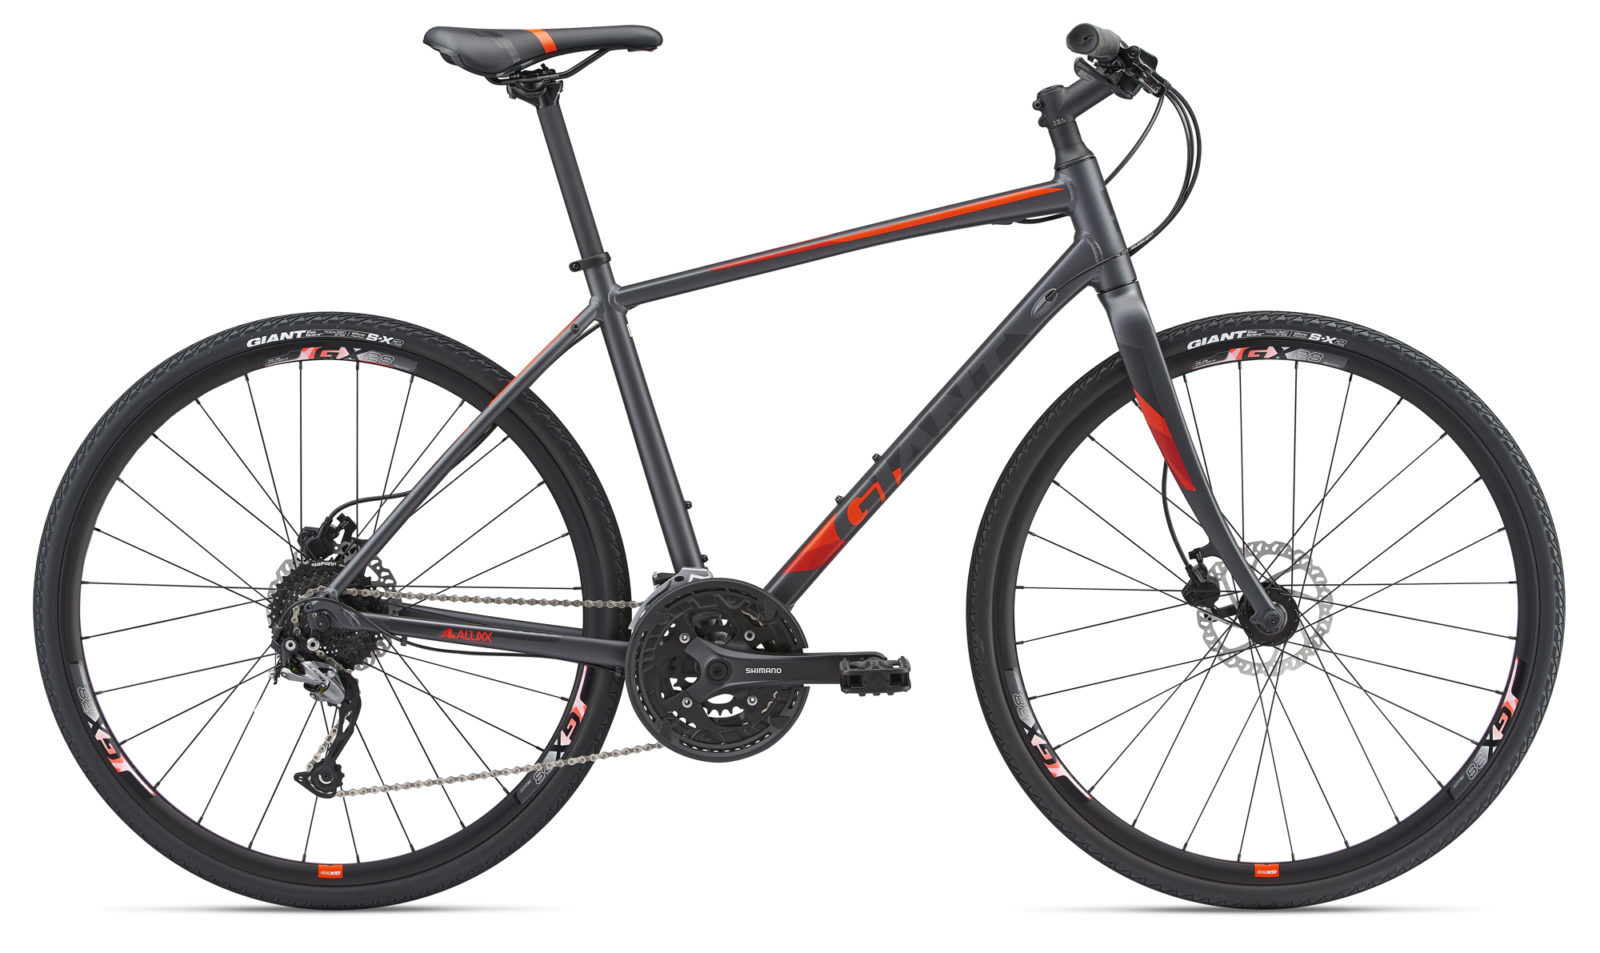 Giant X-Road Excape 1 Disc 2019